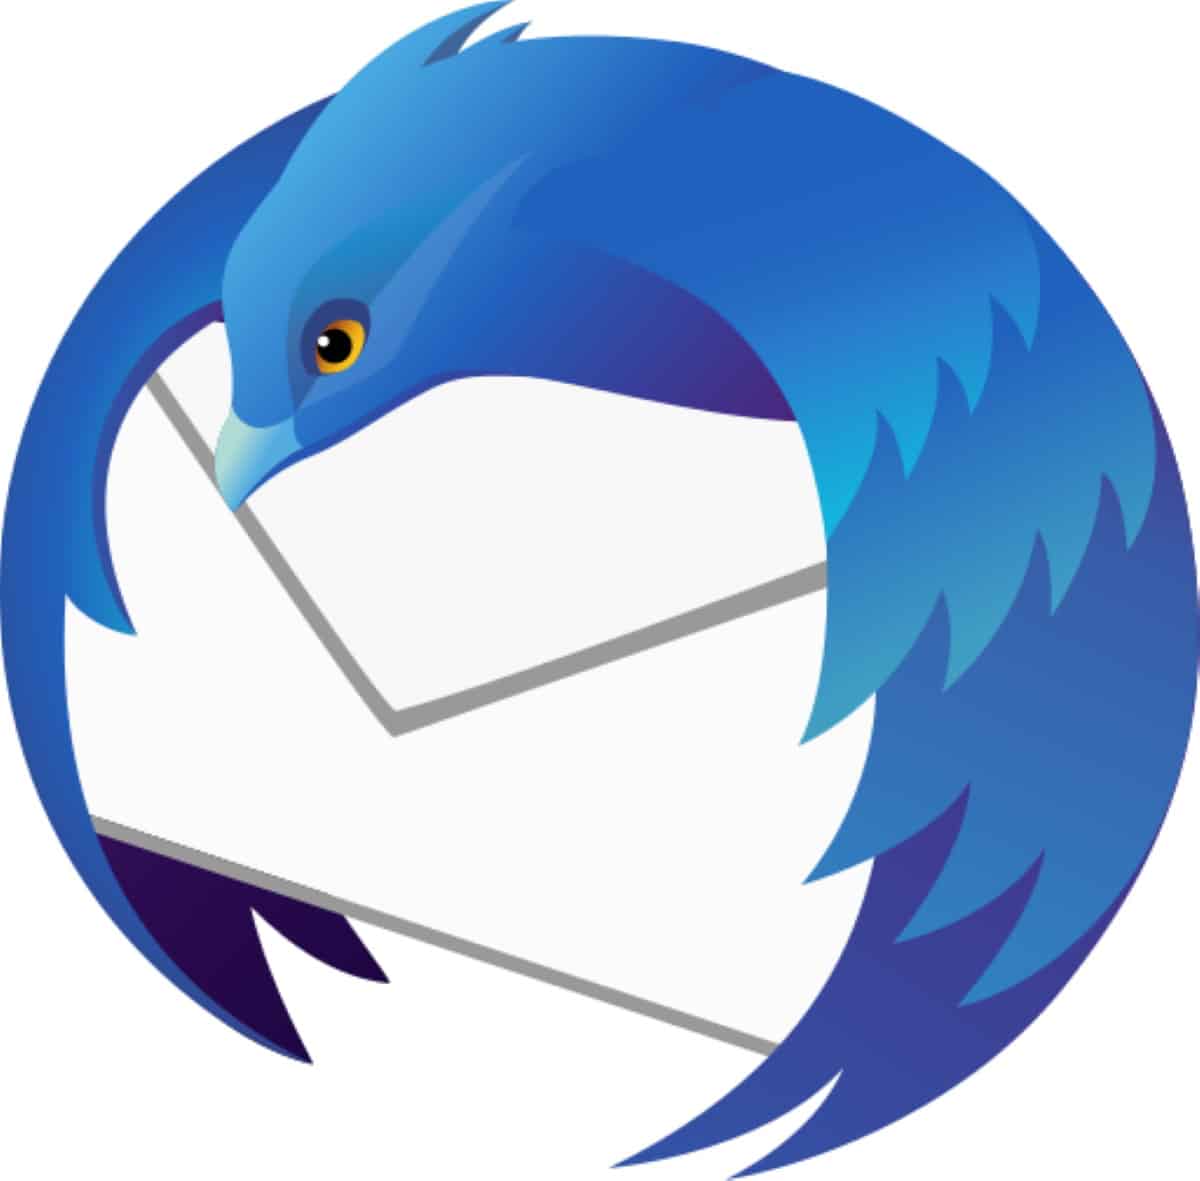 Thunderbird 91.4.0 email client released